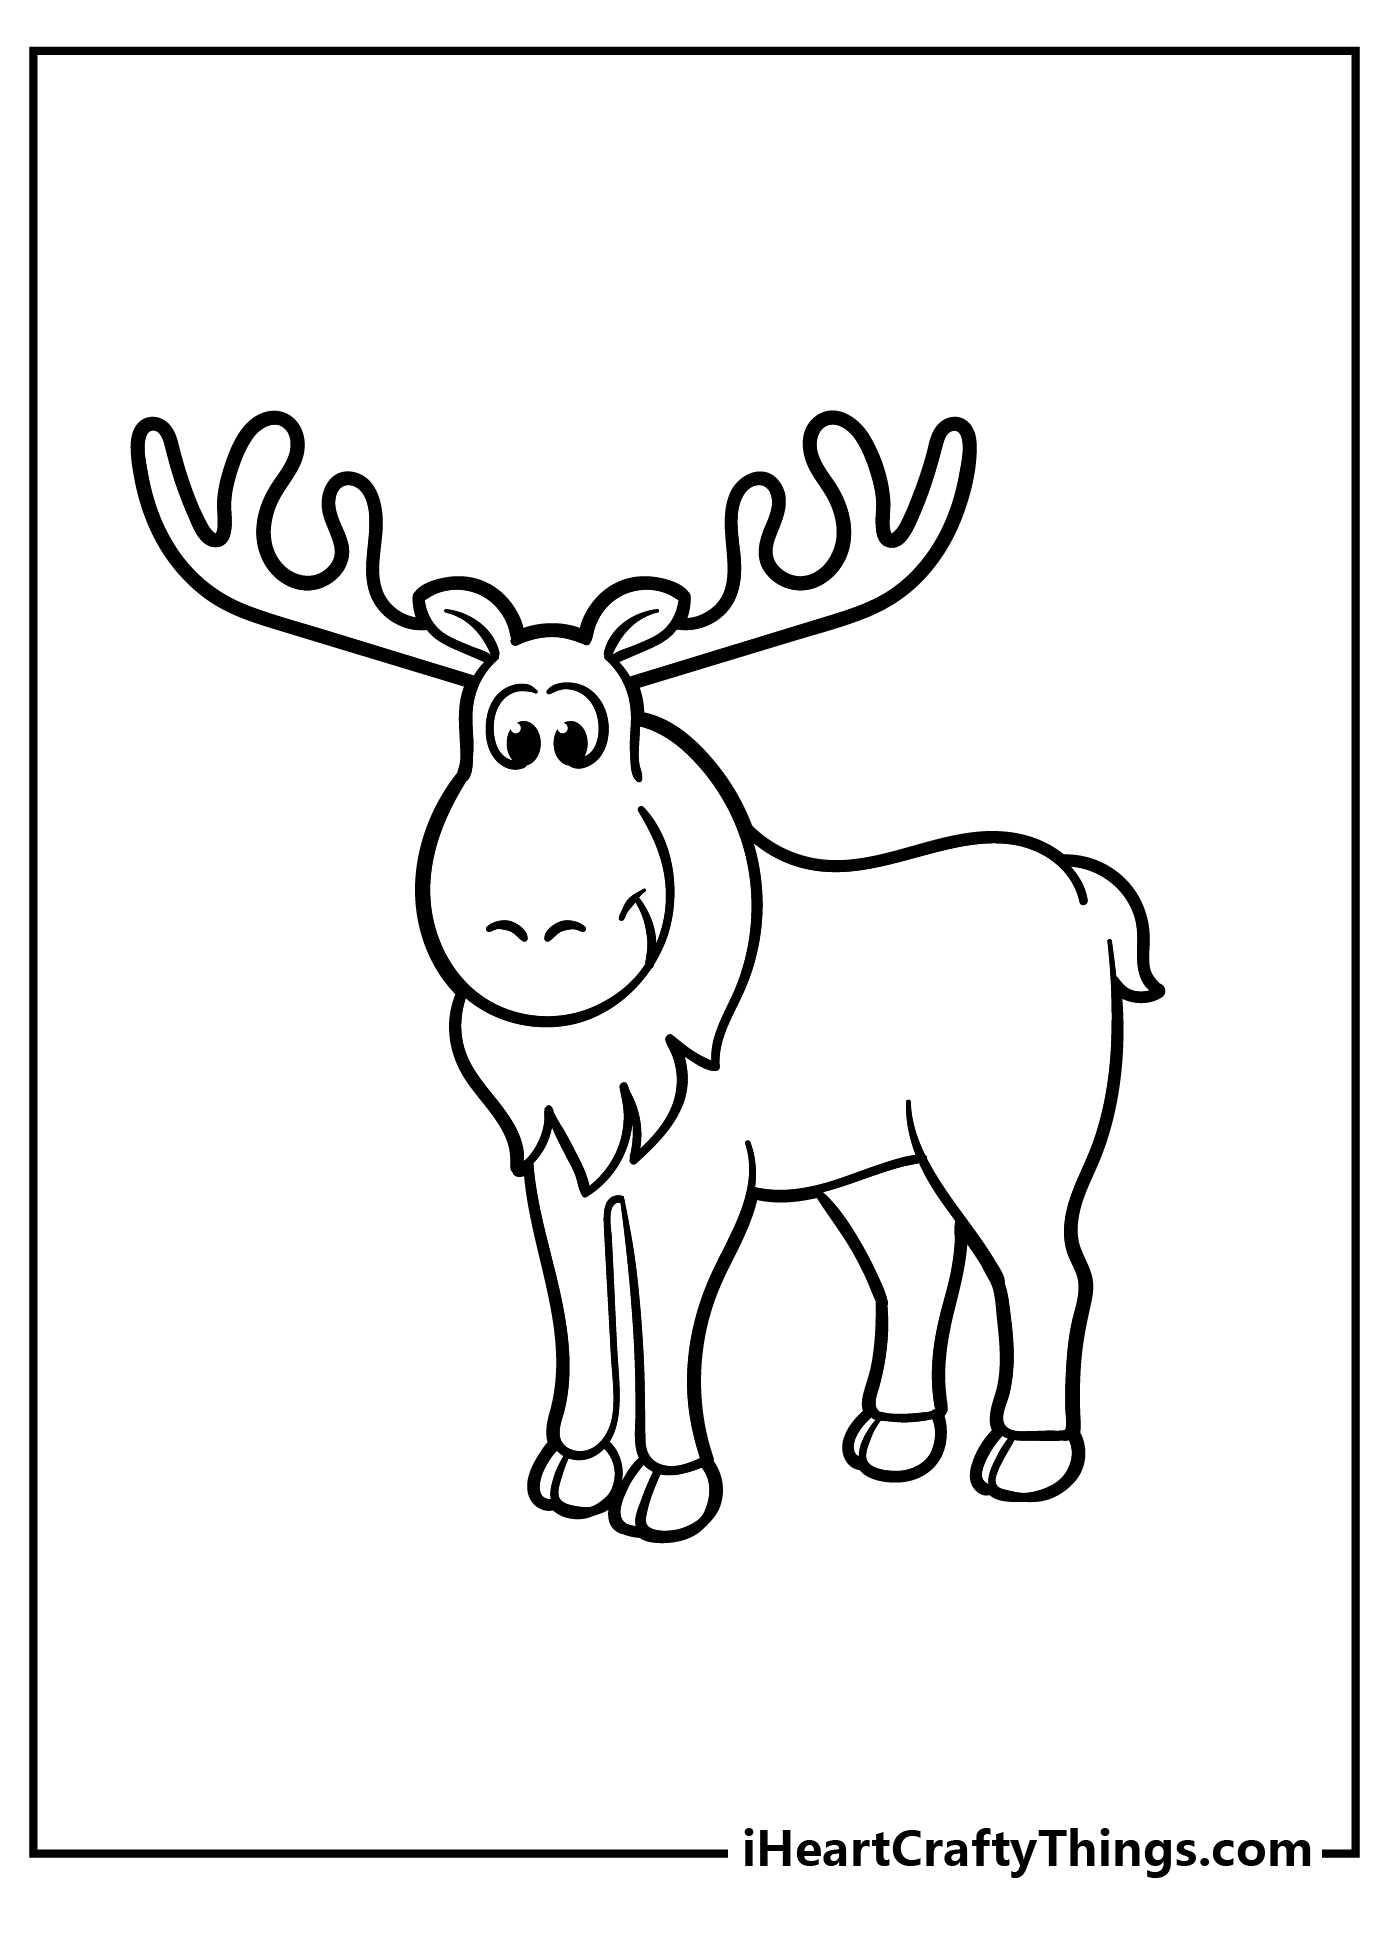 Moose coloring pages free printables